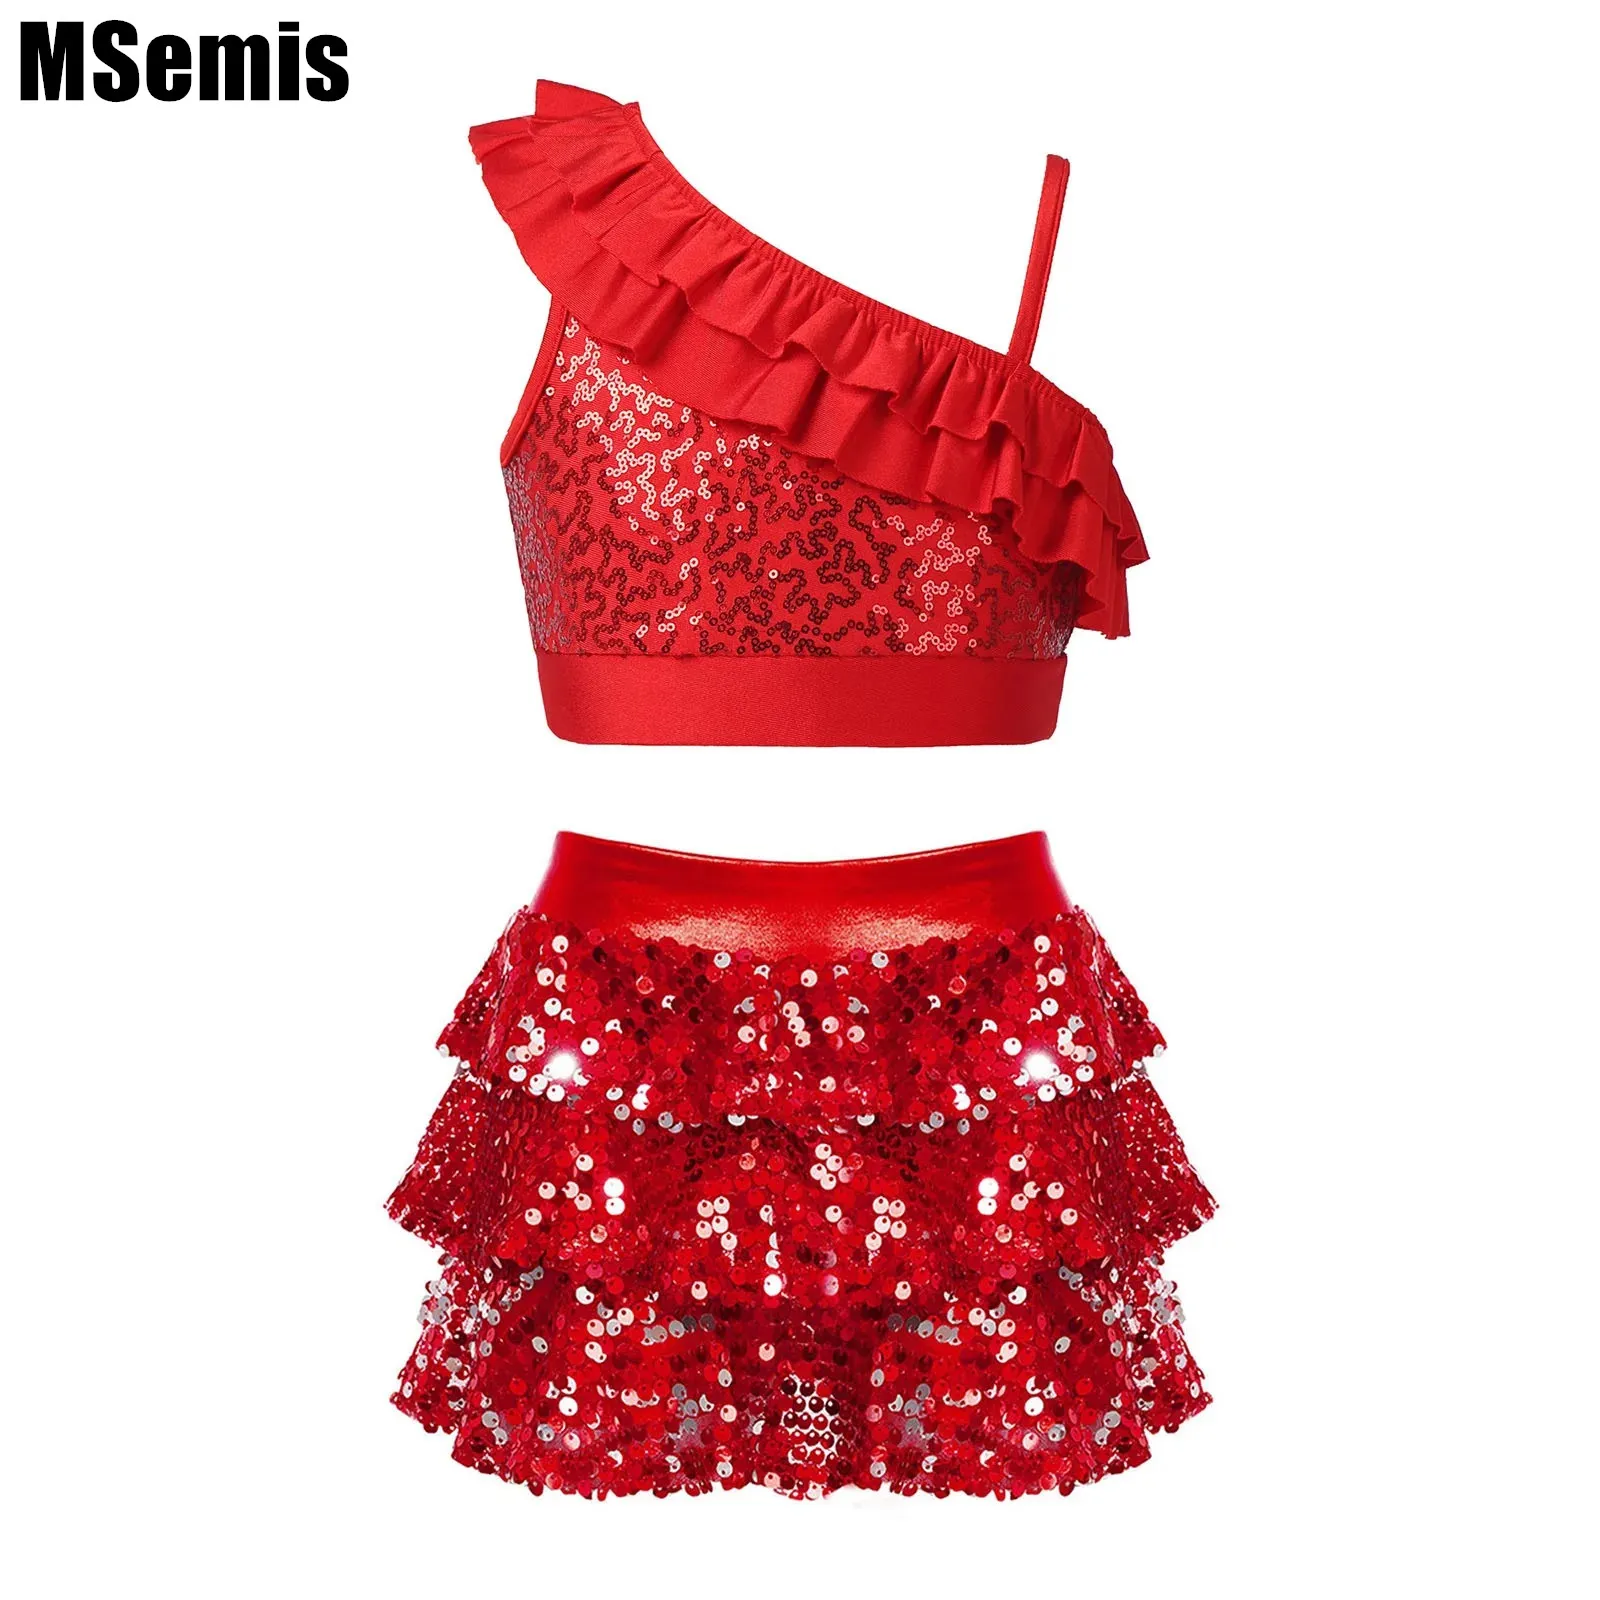 

Kids Girls Sequin Ruffle Dance Outfit Asymmetrical Shoulder Straps Crop Top with Sequins Tiered Ruffle Skirted Shorts Culottes